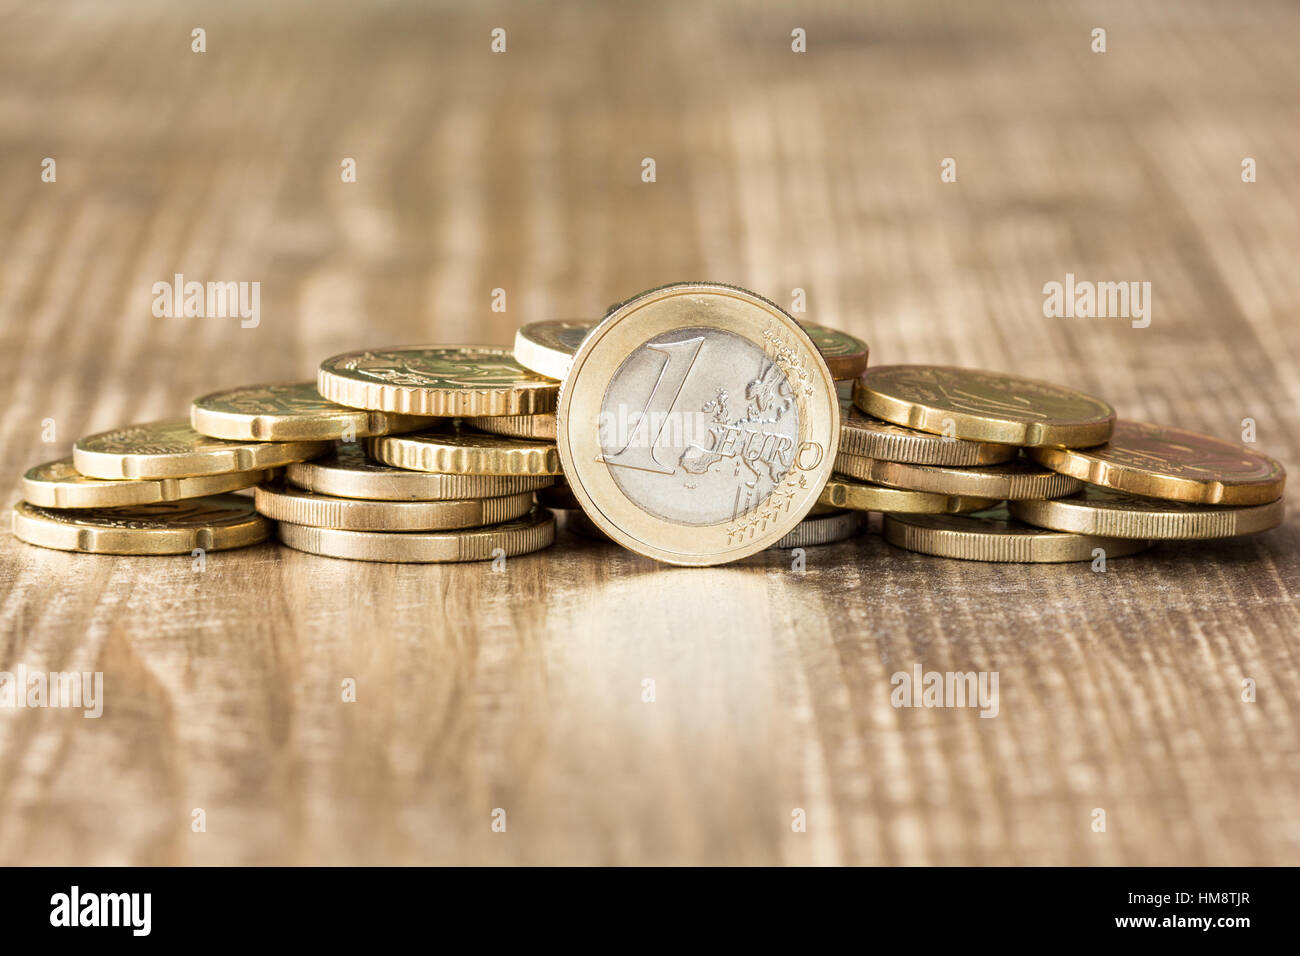 Euro coins on the wooden table surface Stock Photo